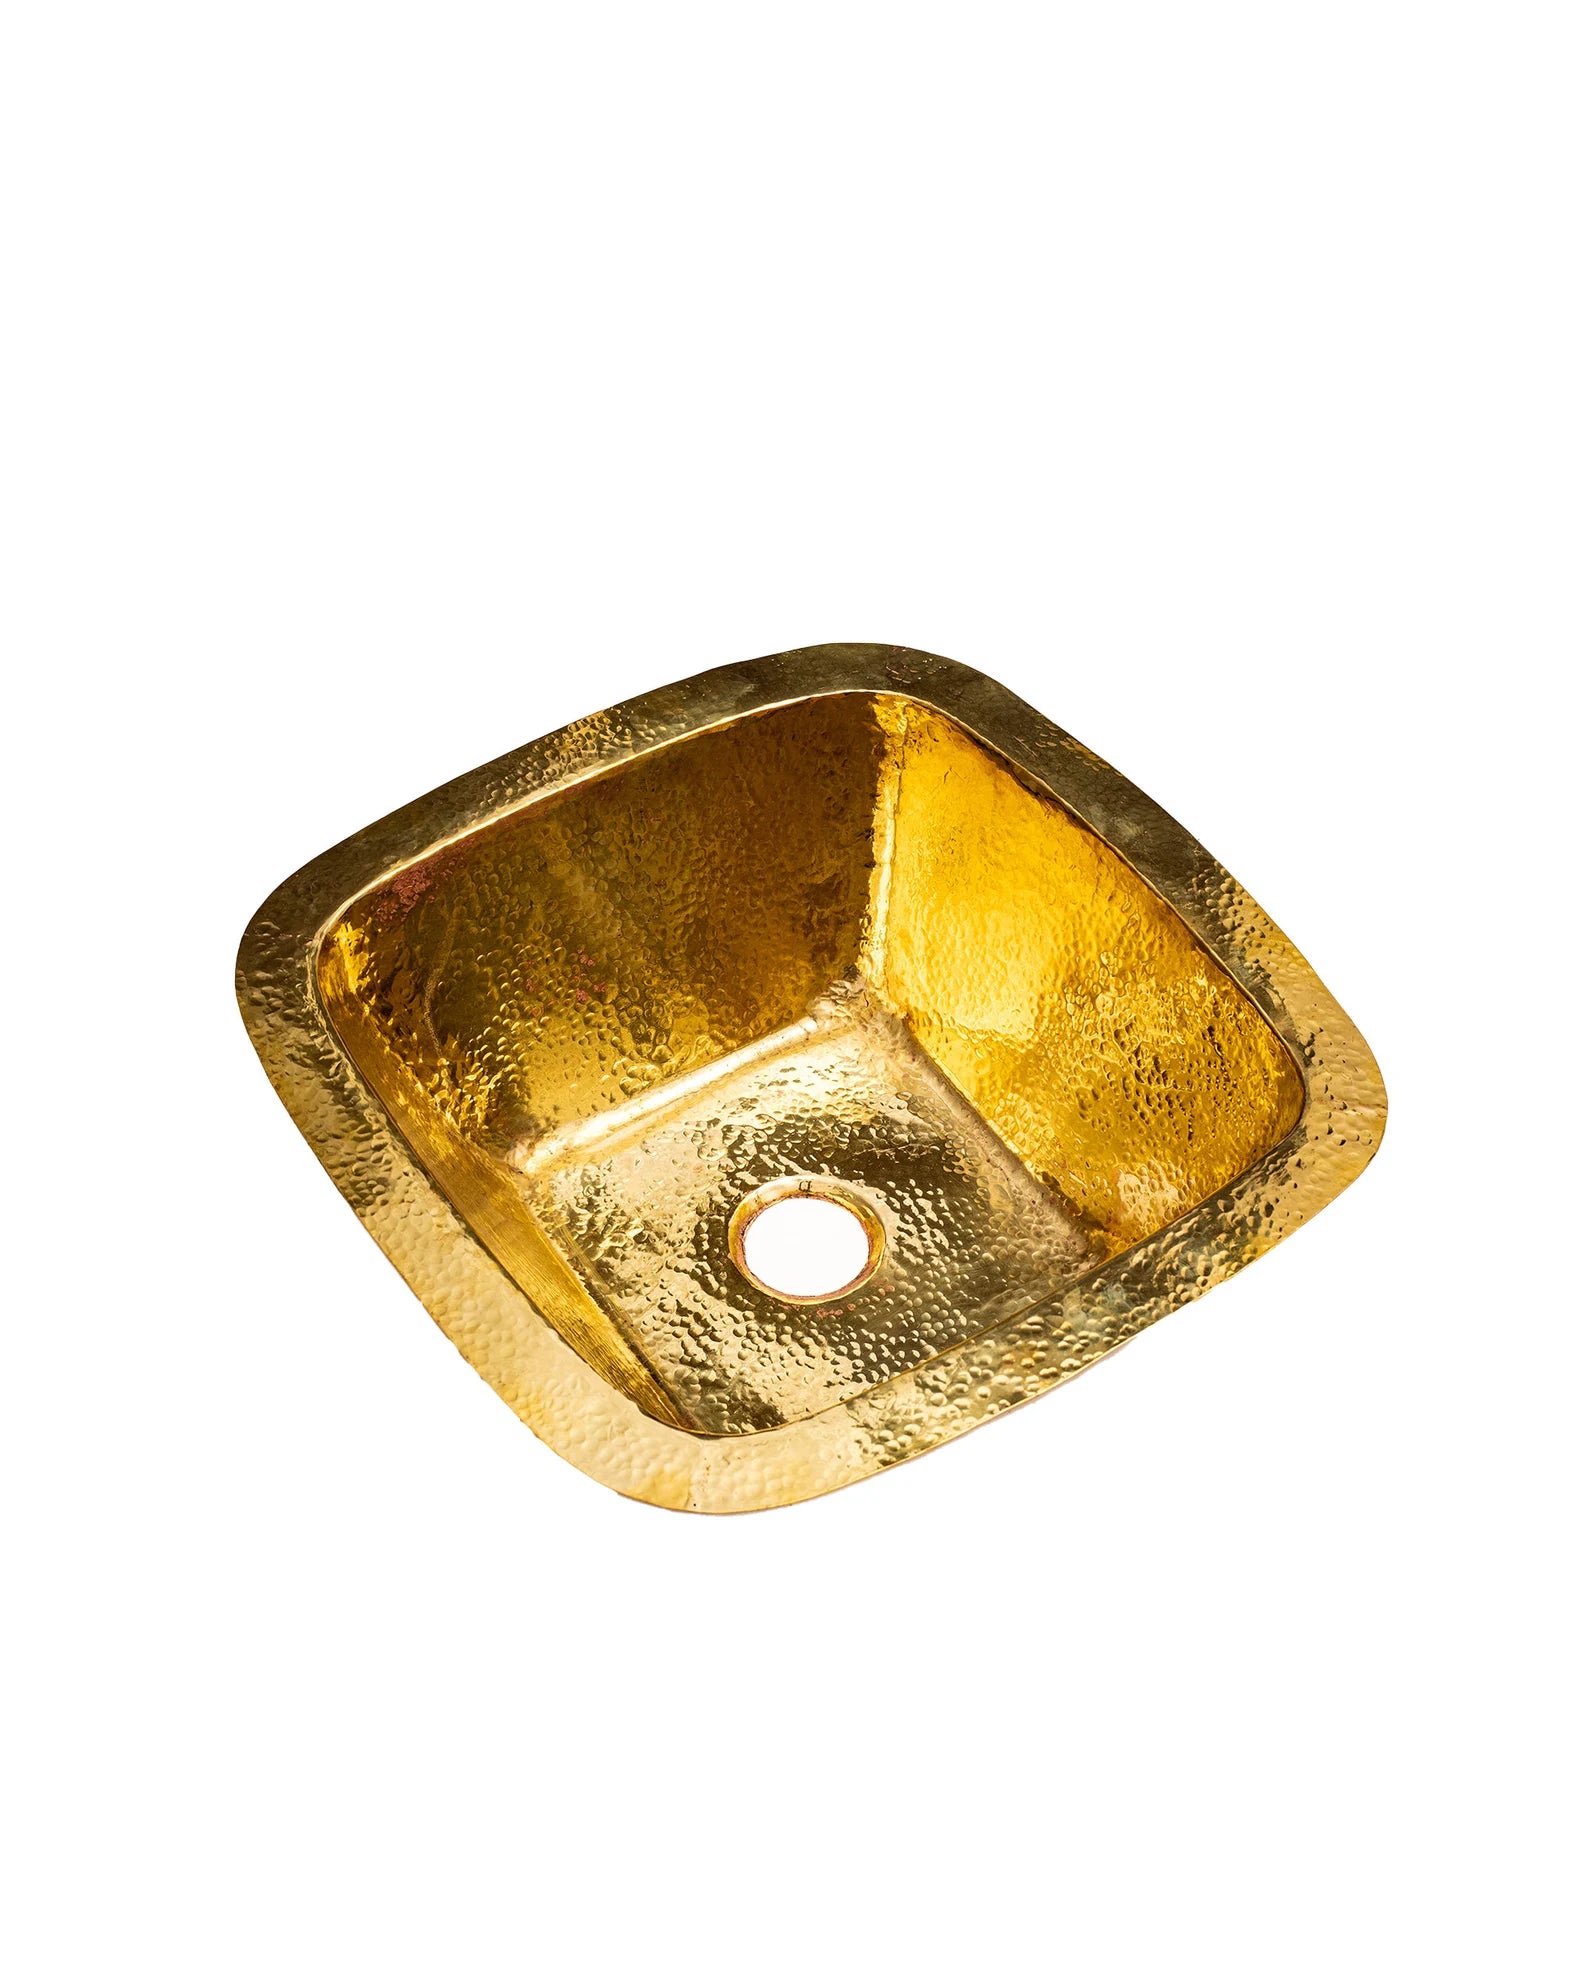 Hammered Unlacquered Brass Square Bar Sink - Zayian